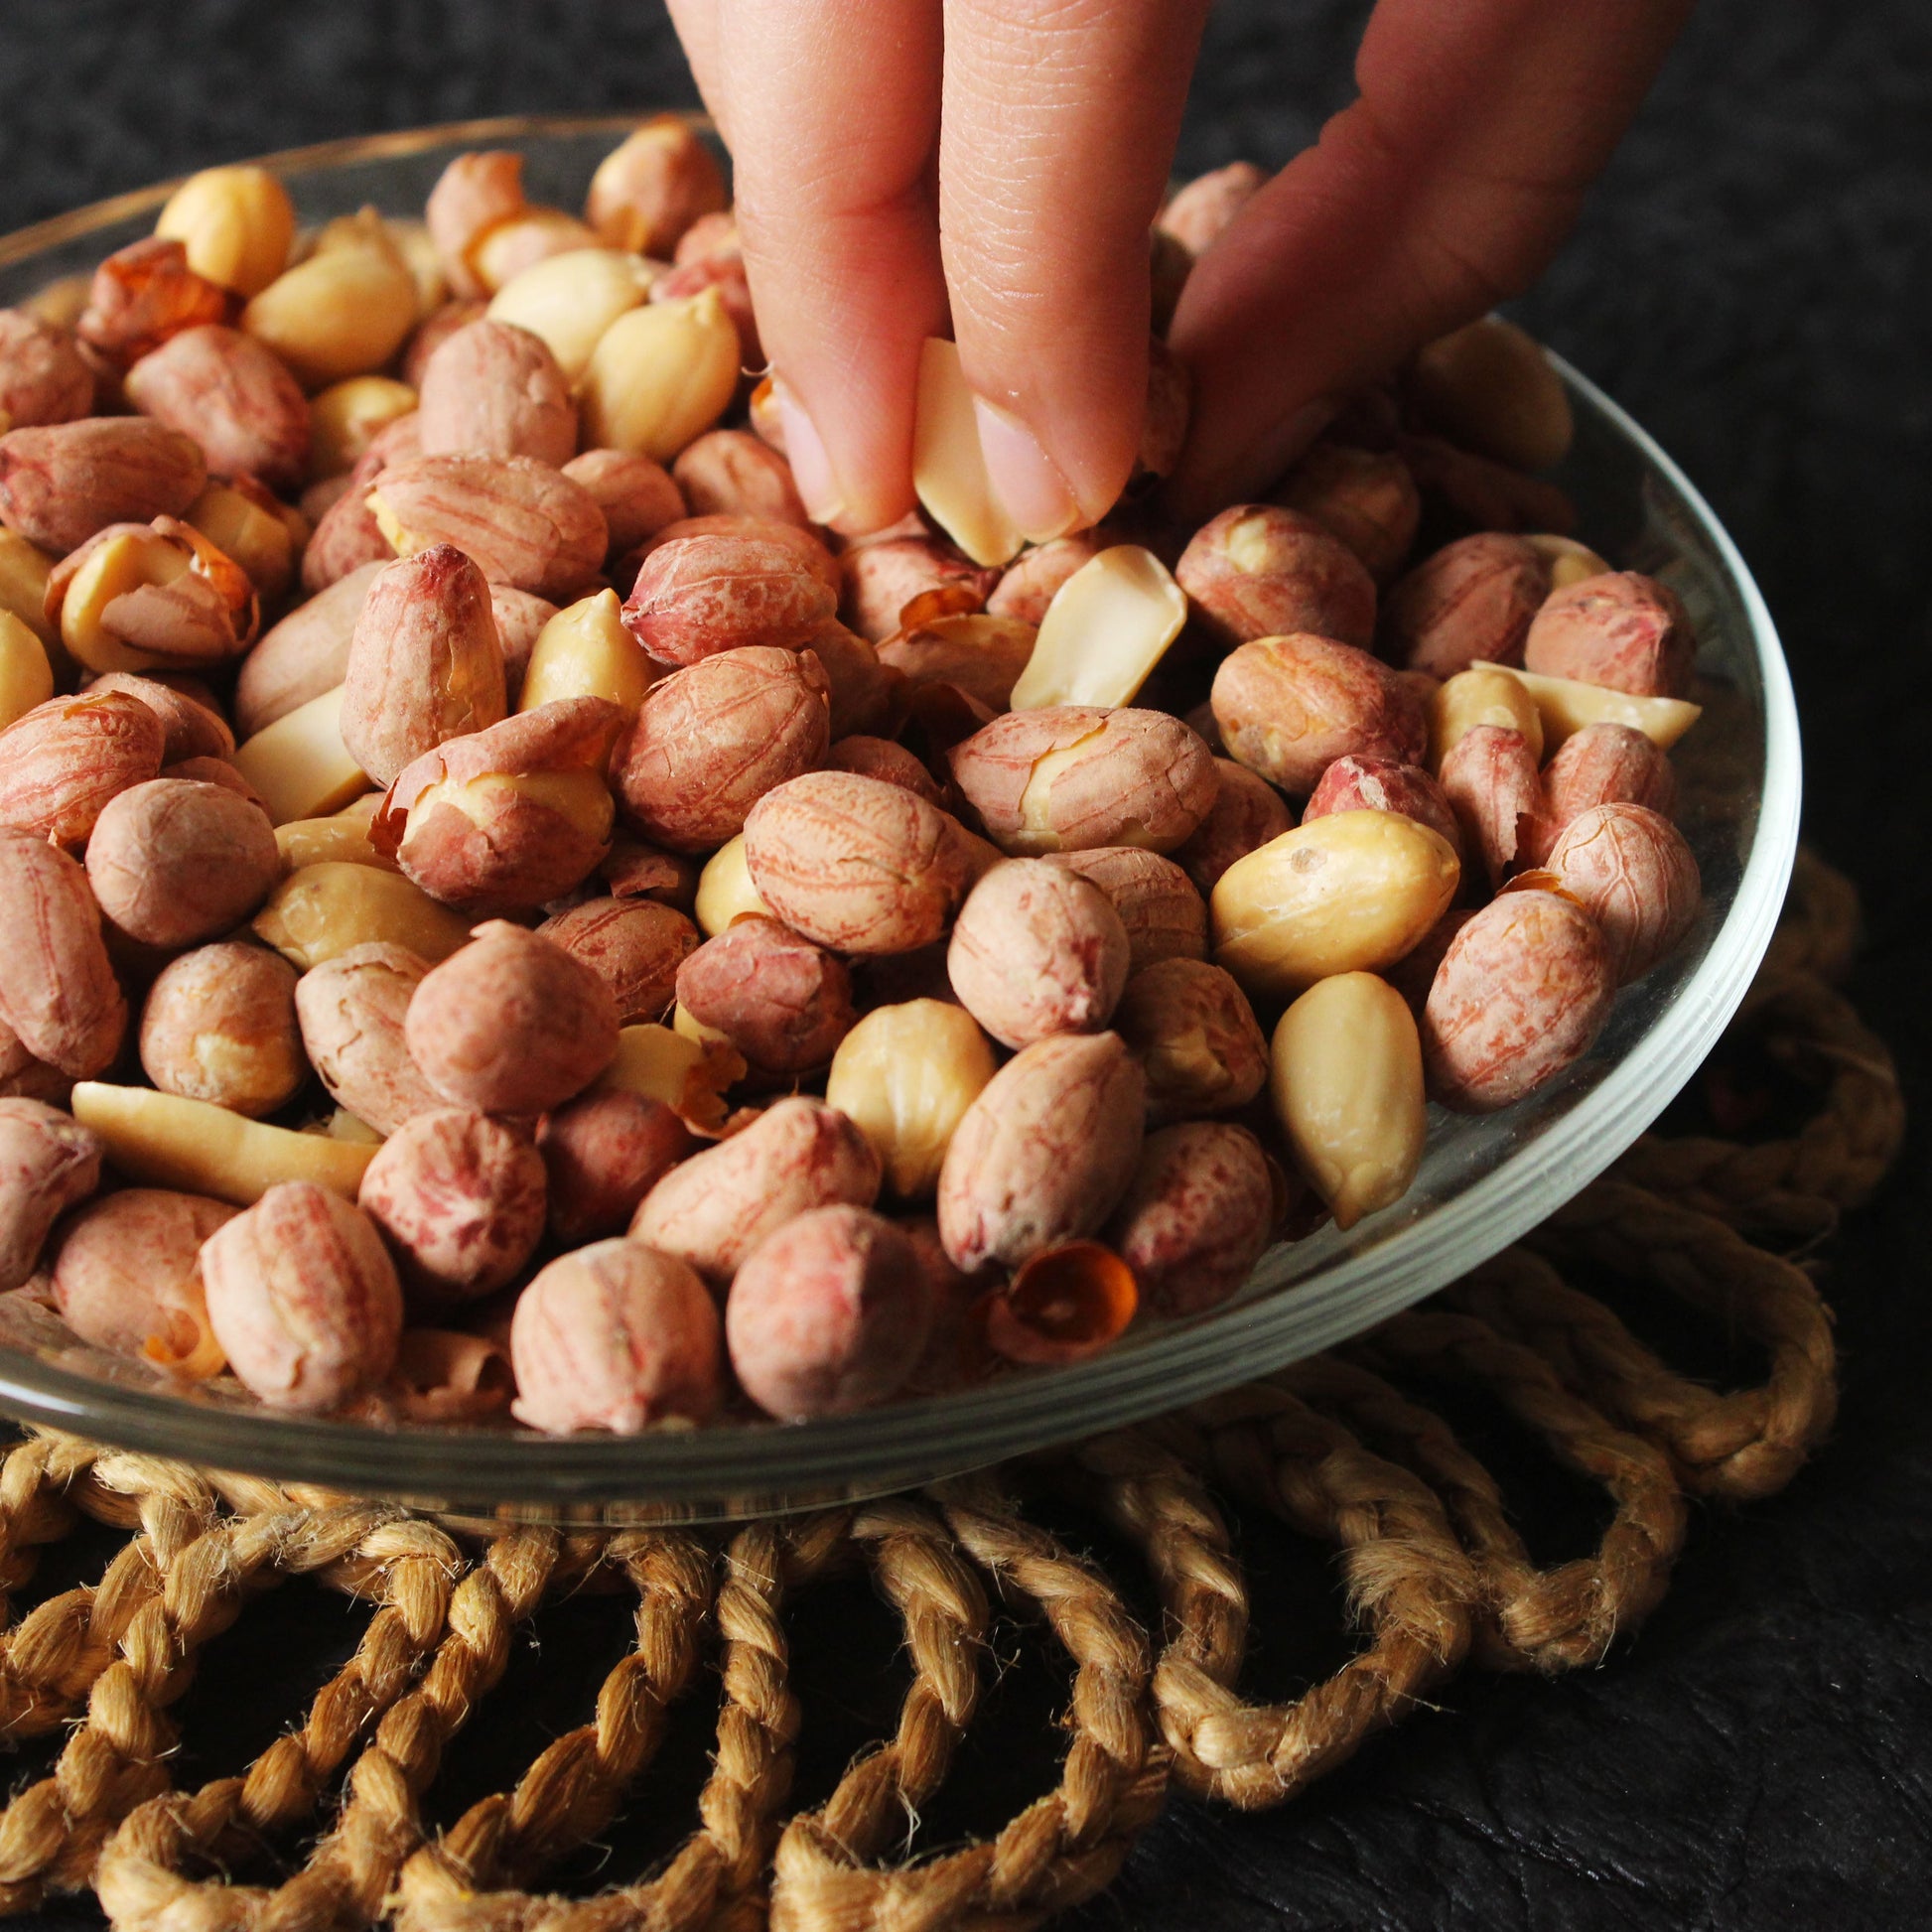 Shop Diamond Roasted Peanuts 180 gms online at best prices on The State Plate